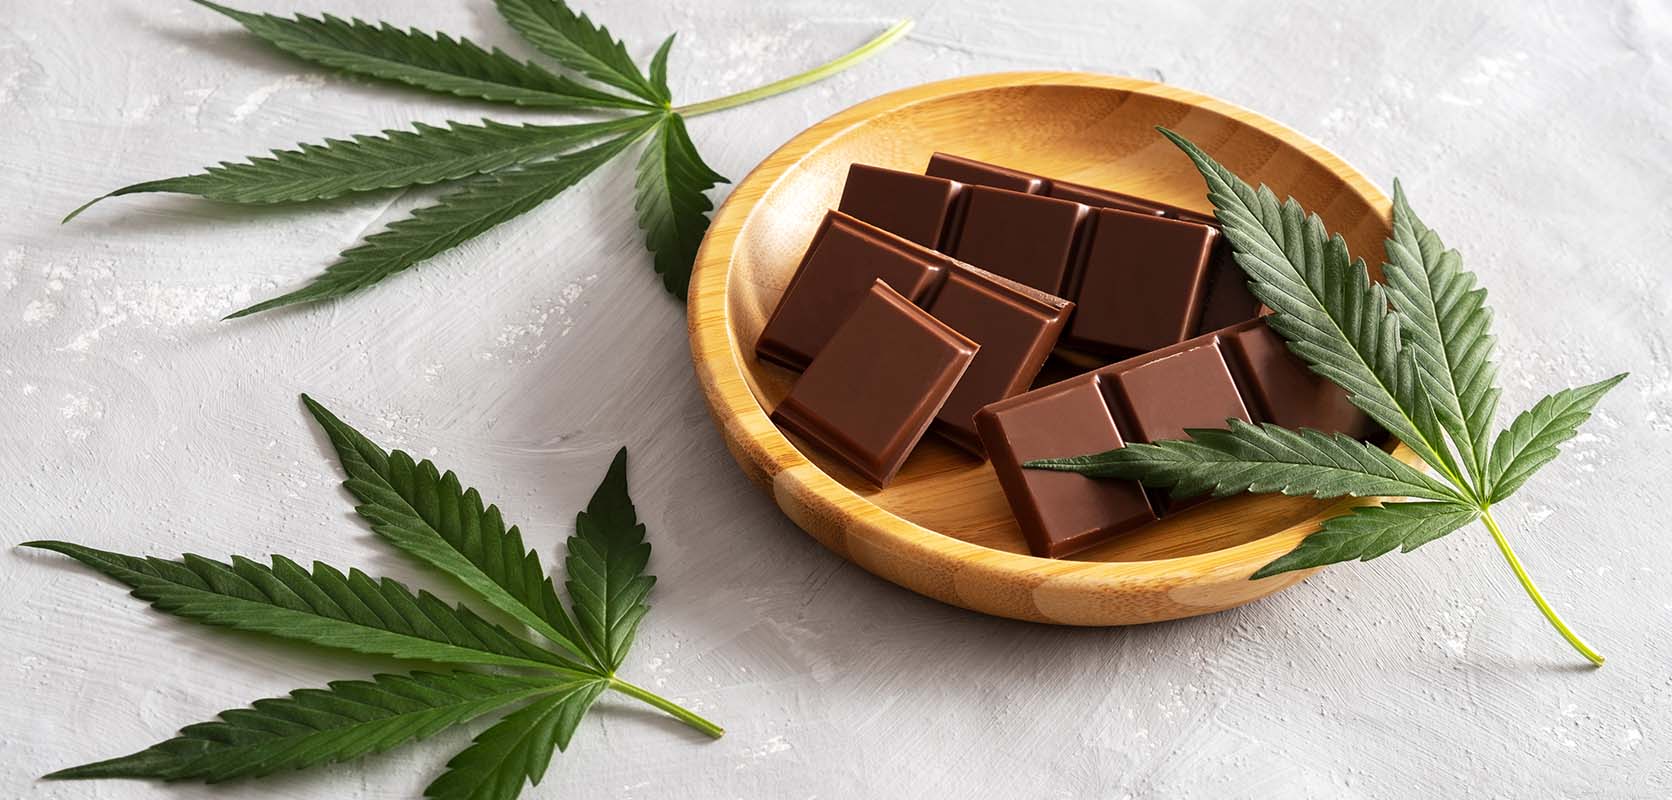 weed chocolate and shatter bars for sale online in Canada. 